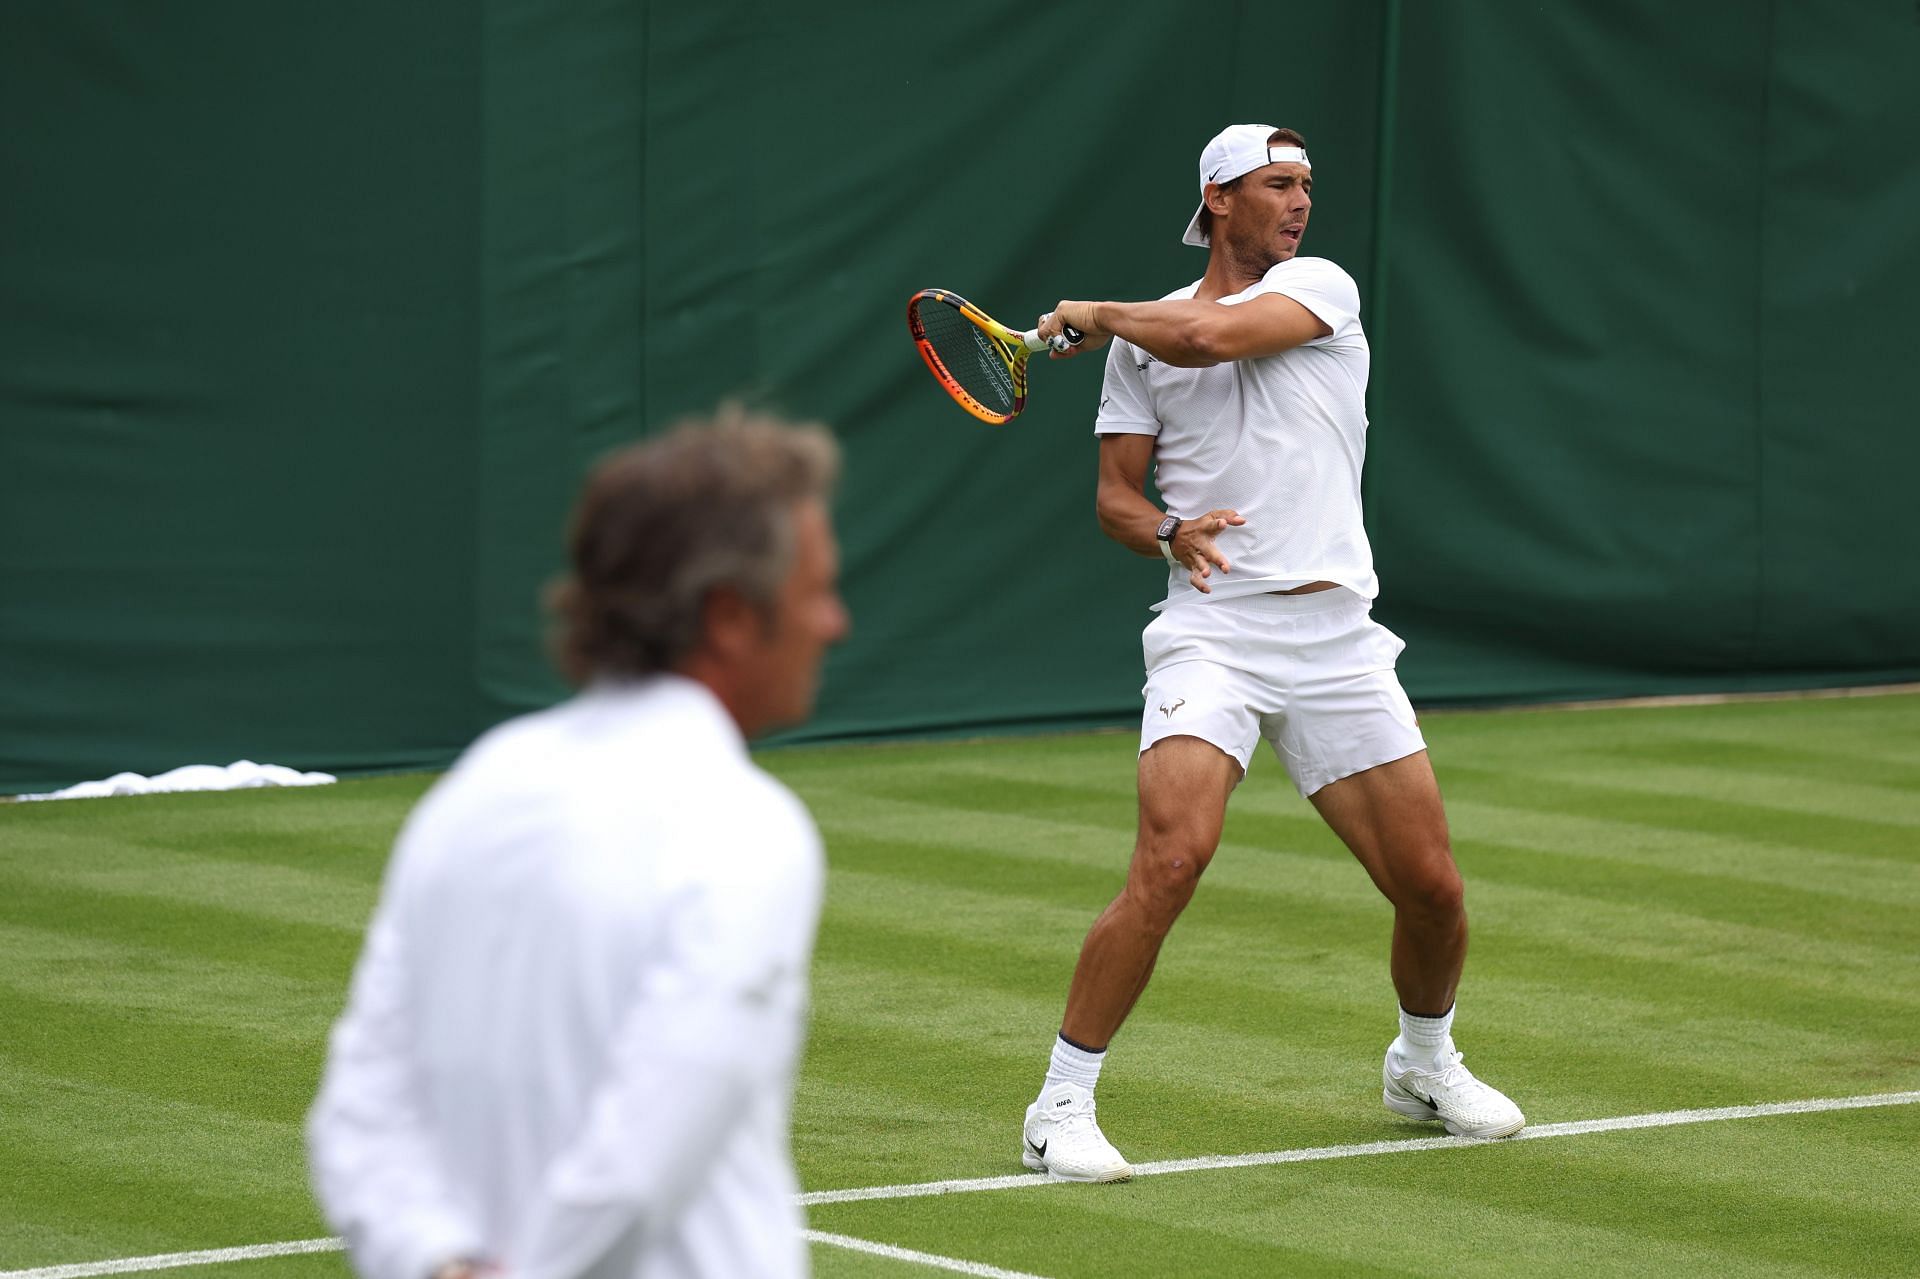 Rafael Nadal at a practice session ahead of the 2022 Wimbledon.